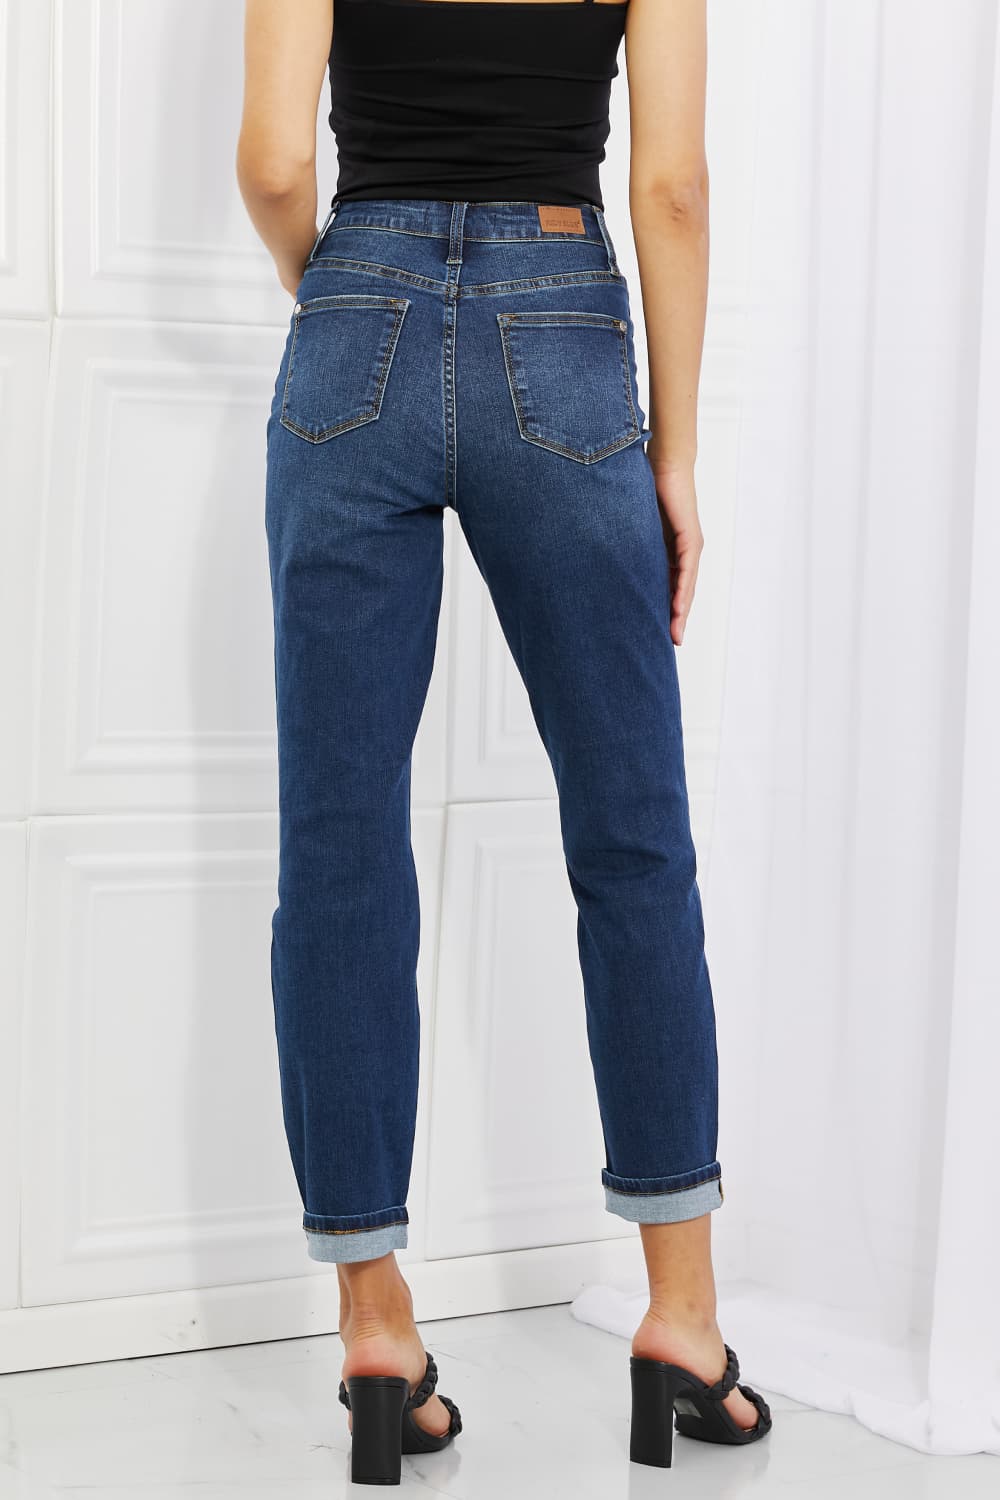 Back View, Judy Blue, High-Rise Sustainable Cool Denim Cuffed Boyfriend Jeans Style 88608